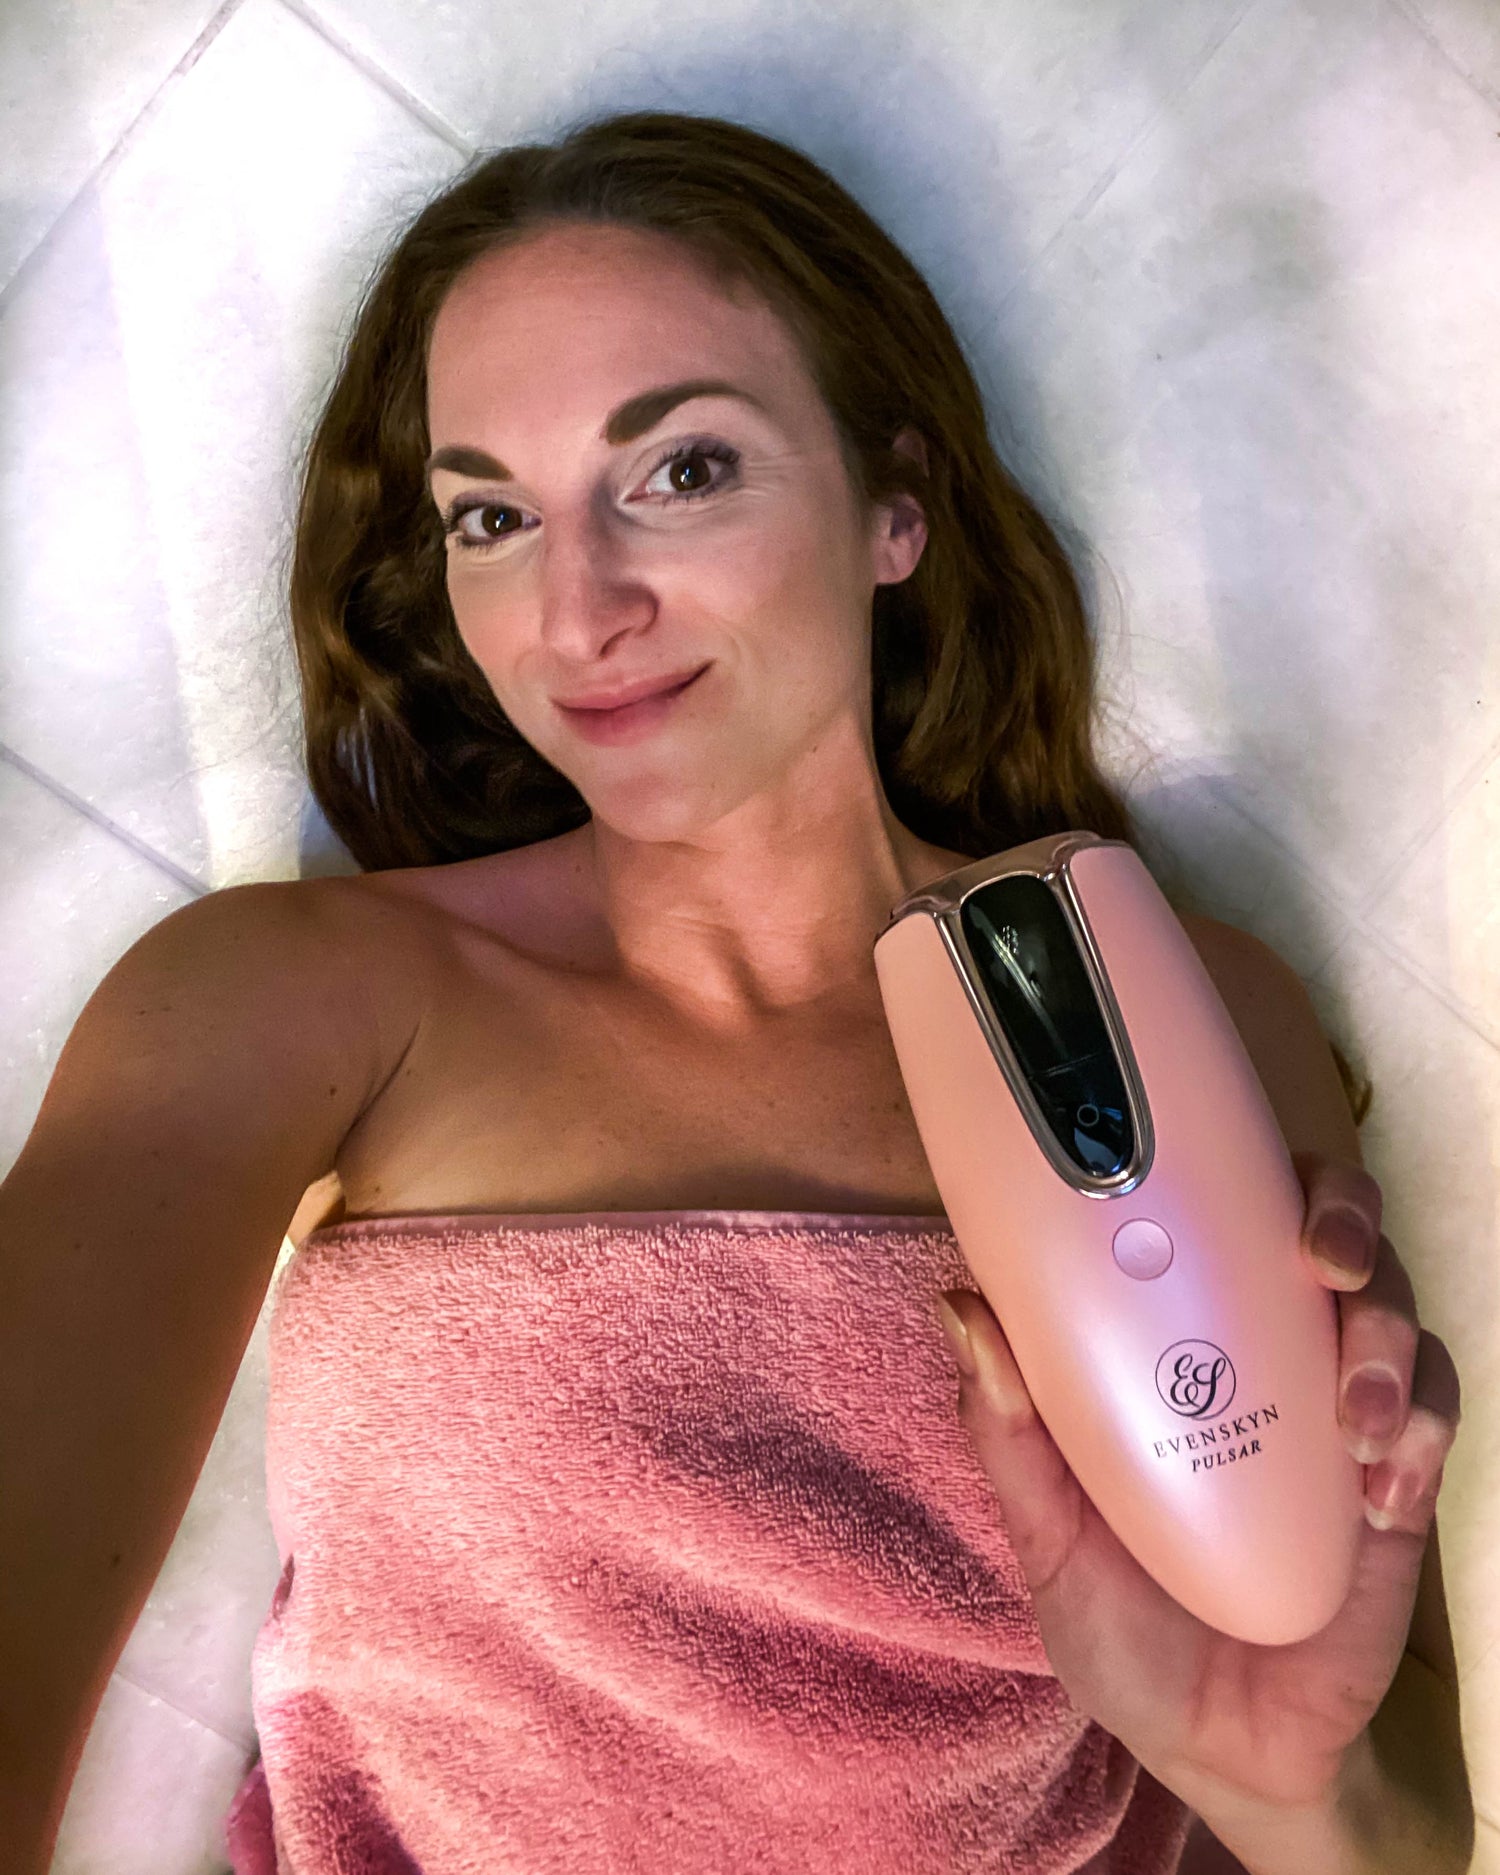 How Effective are at-Home Laser Hair Removal Devices?